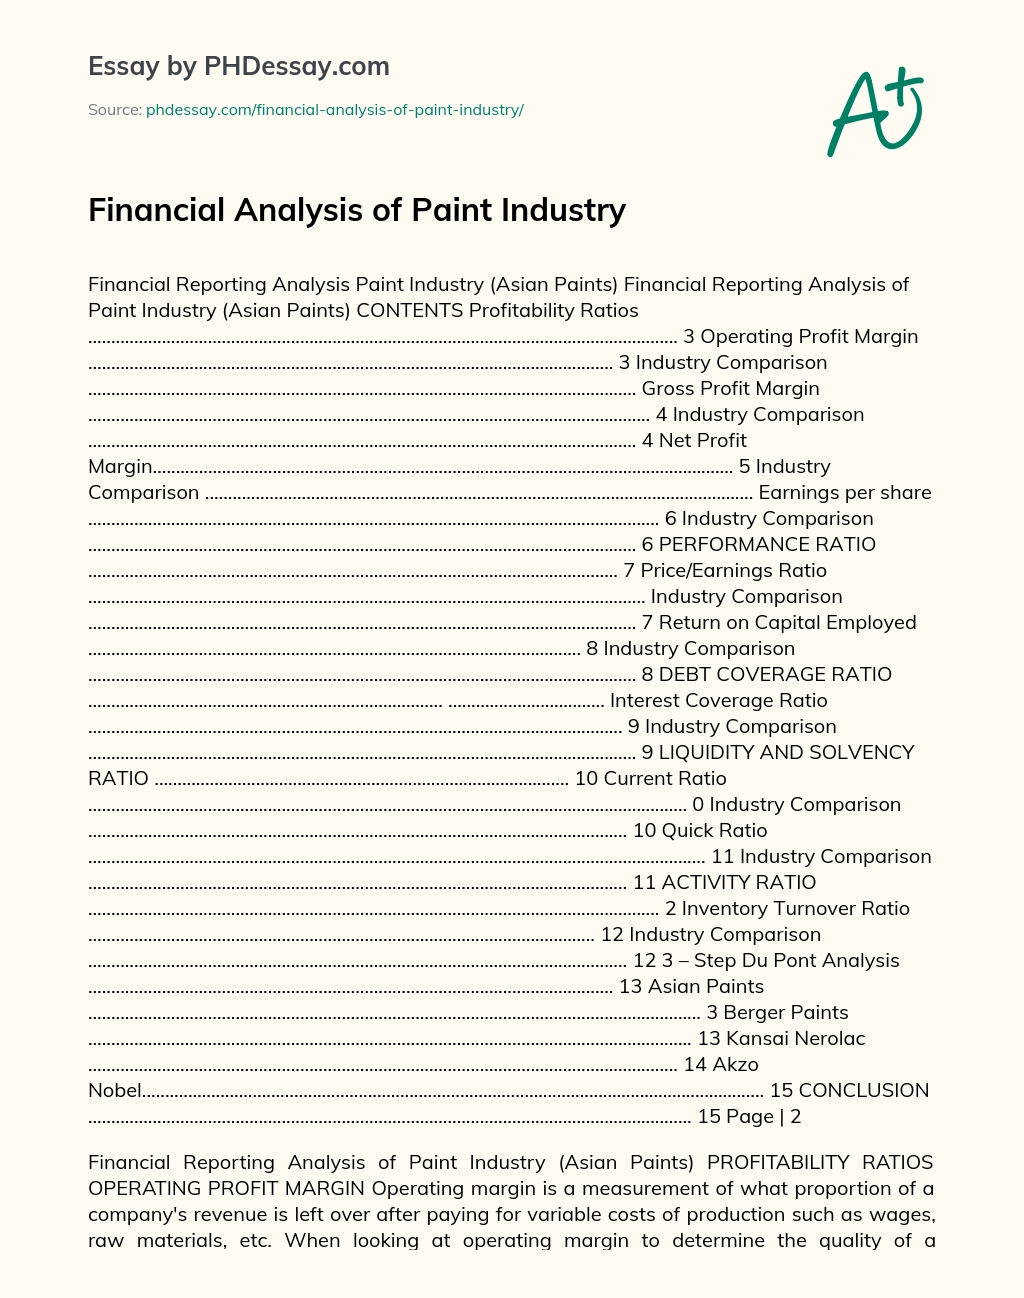 Financial Analysis of Paint Industry essay